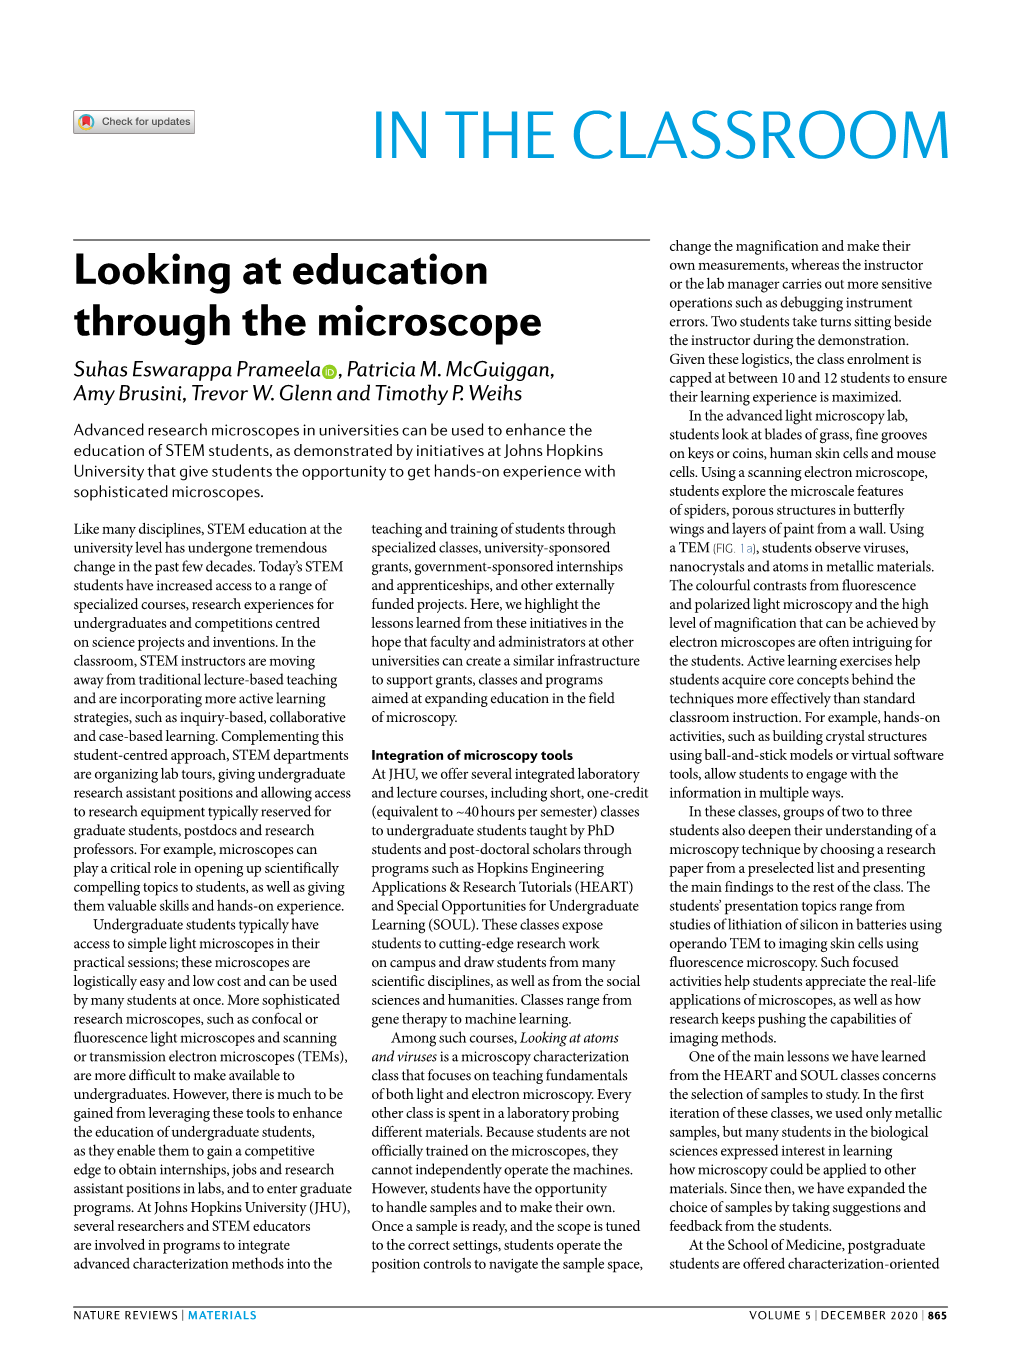 Looking at Education Through the Microscope